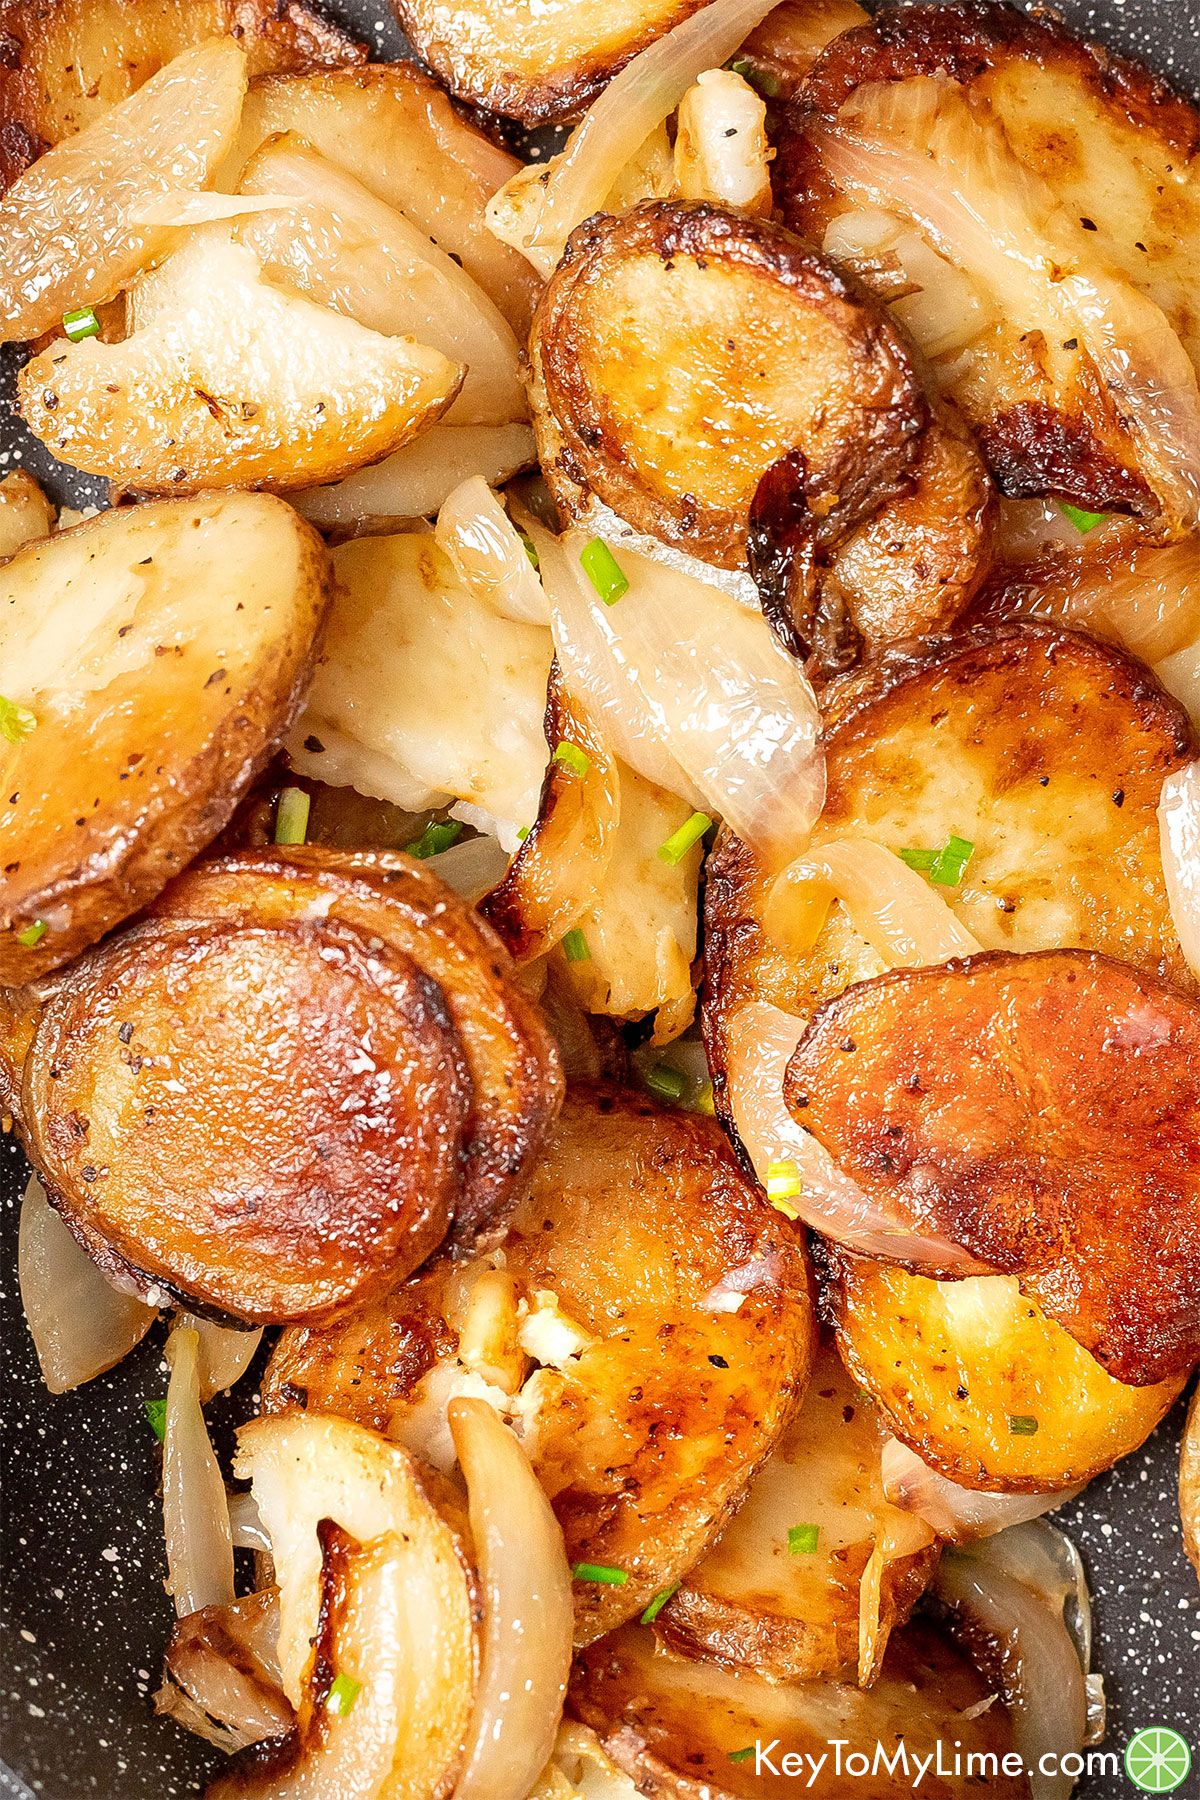 A close up image of freshly garnished potatoes with onions throughout.